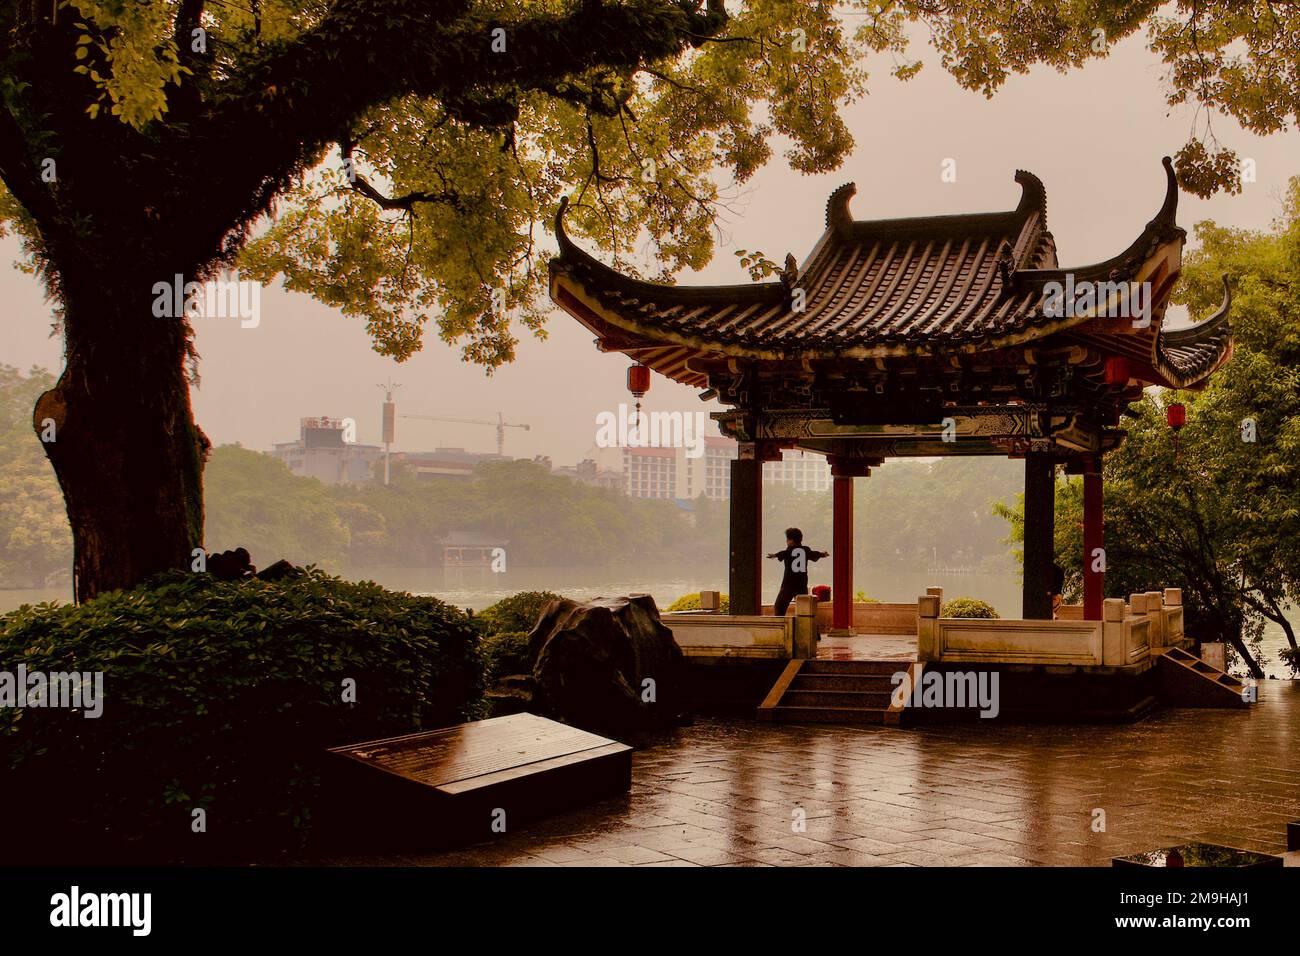 Chinese pavilion, river and trees, Guilin, Guangxi Zhuang Autonomous Region, China Stock Photo